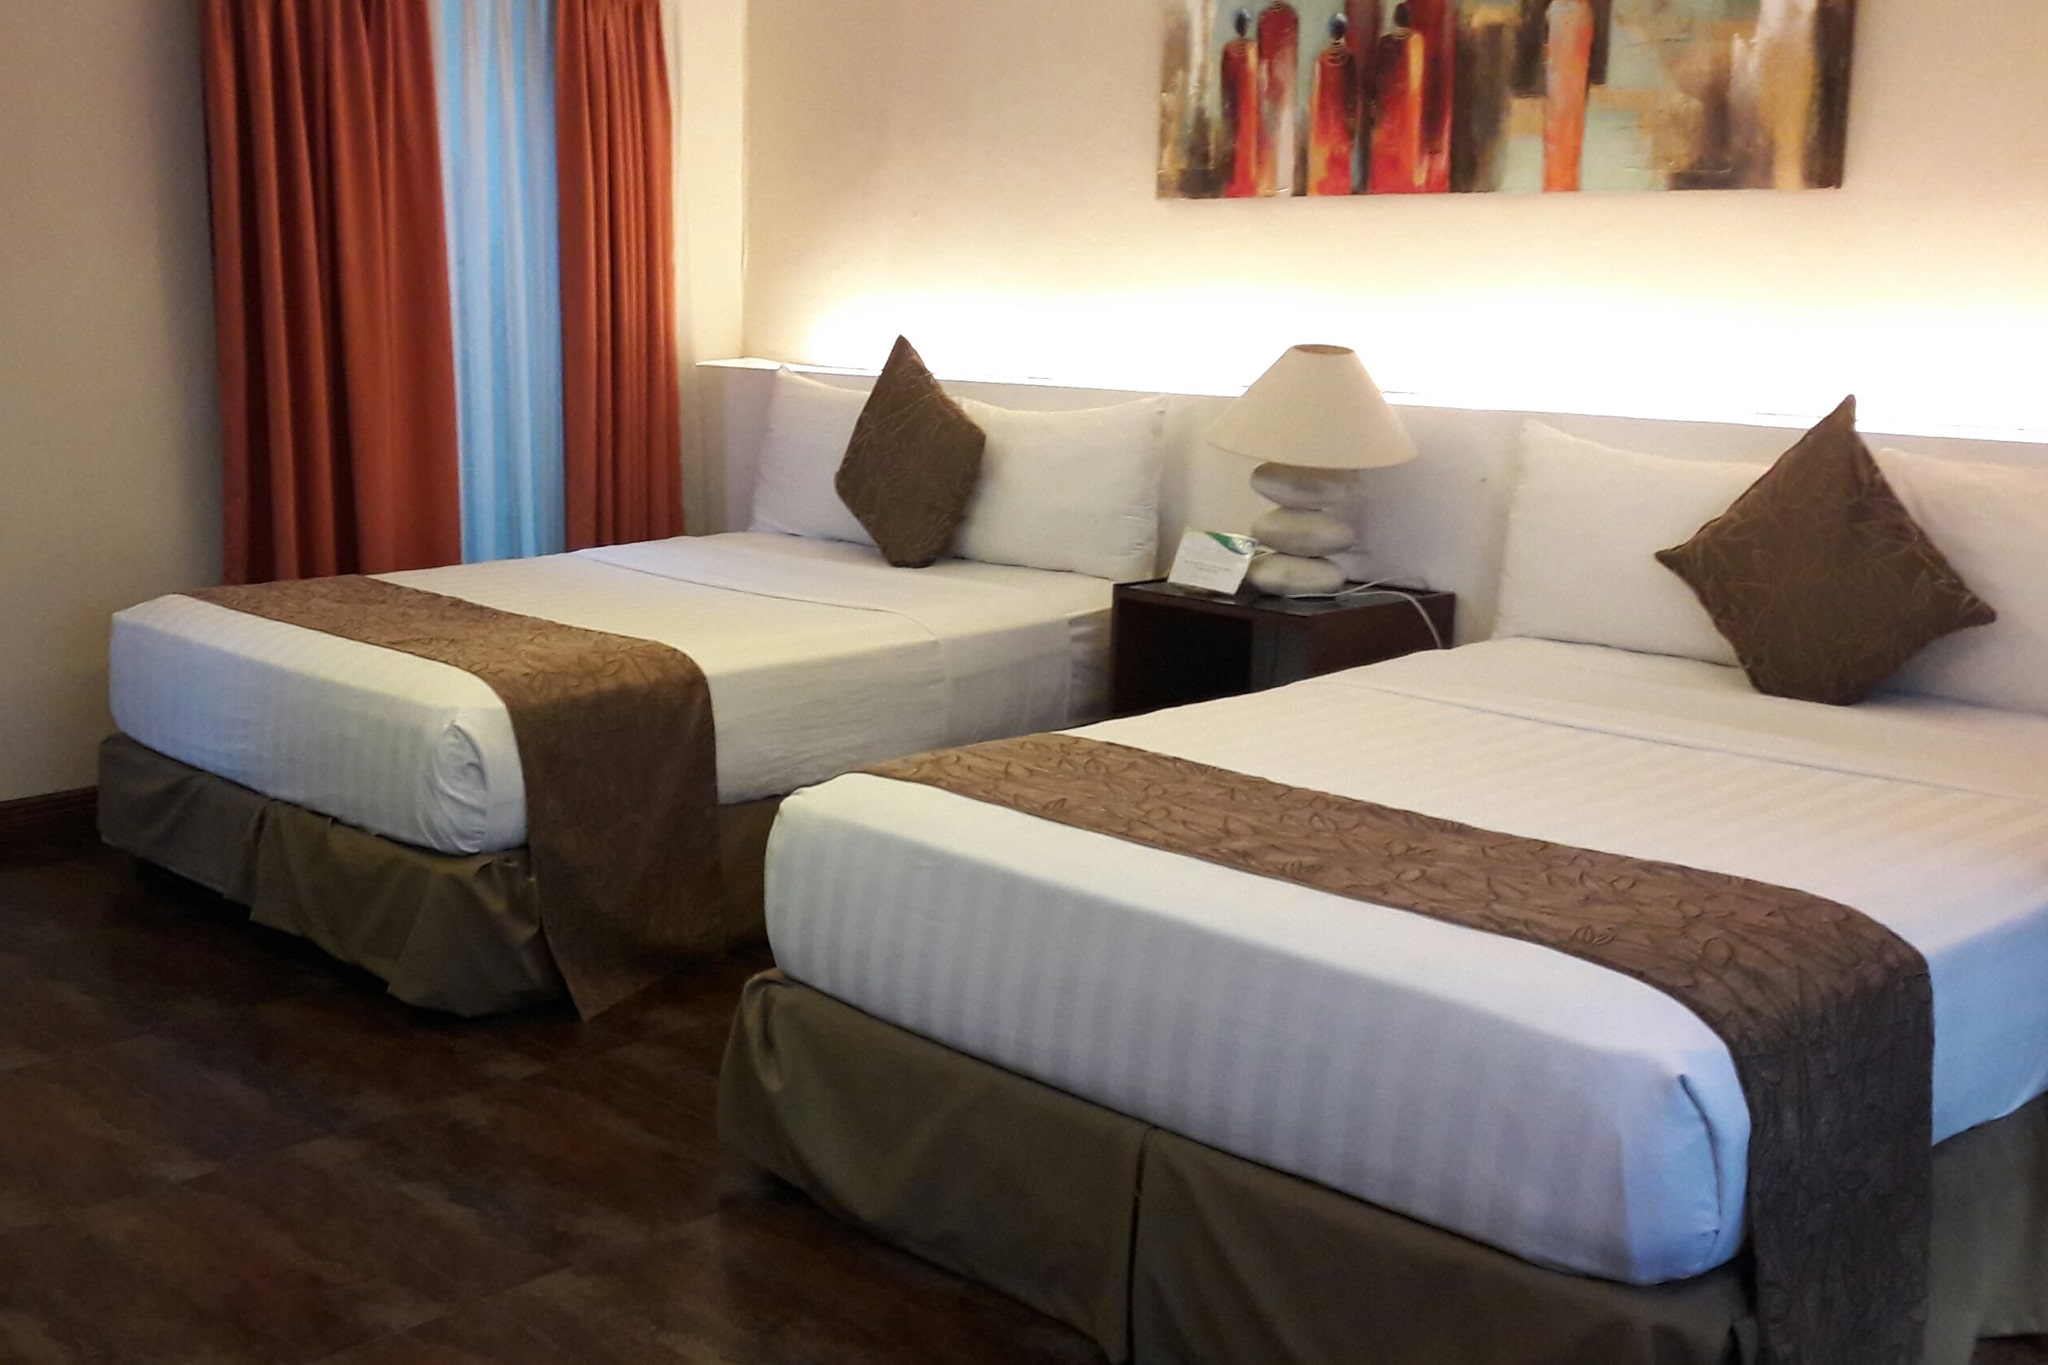 Courtyard Junior Suite
Amenities: 

Telephone, Writing table with chair, WiFi, Television with satellite Channels, Electronic Safe/Locker, Minibar, Complimentary Coffee and Bottled Water, Hangers, Laundry Bag, Slippers, Bathroom with hot and cold… Continue Reading..